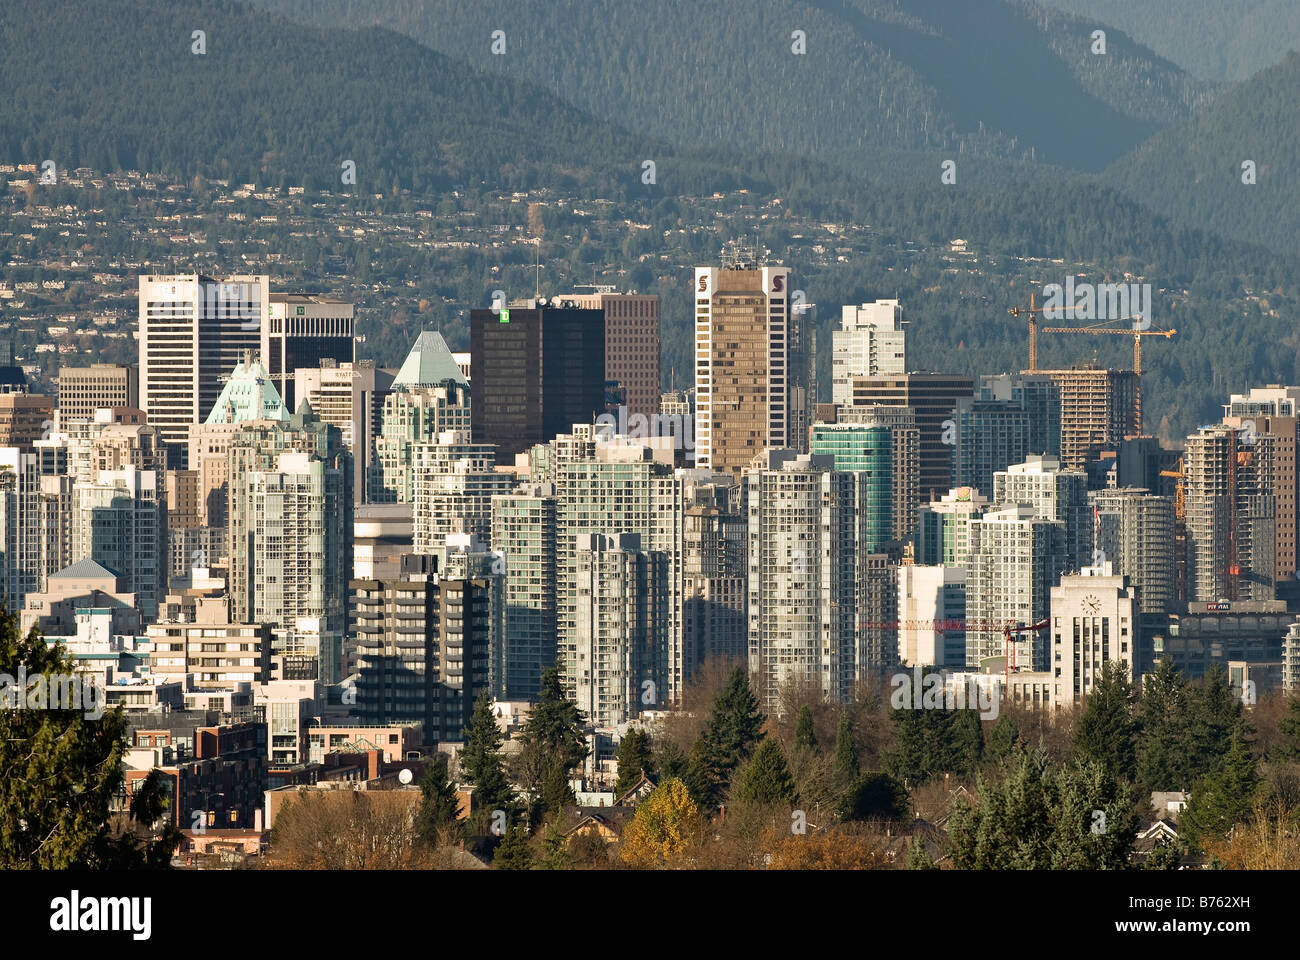 A view of the ever changing skyline of the downtown area of Vancouver set against mountains on the north shore. Stock Photo